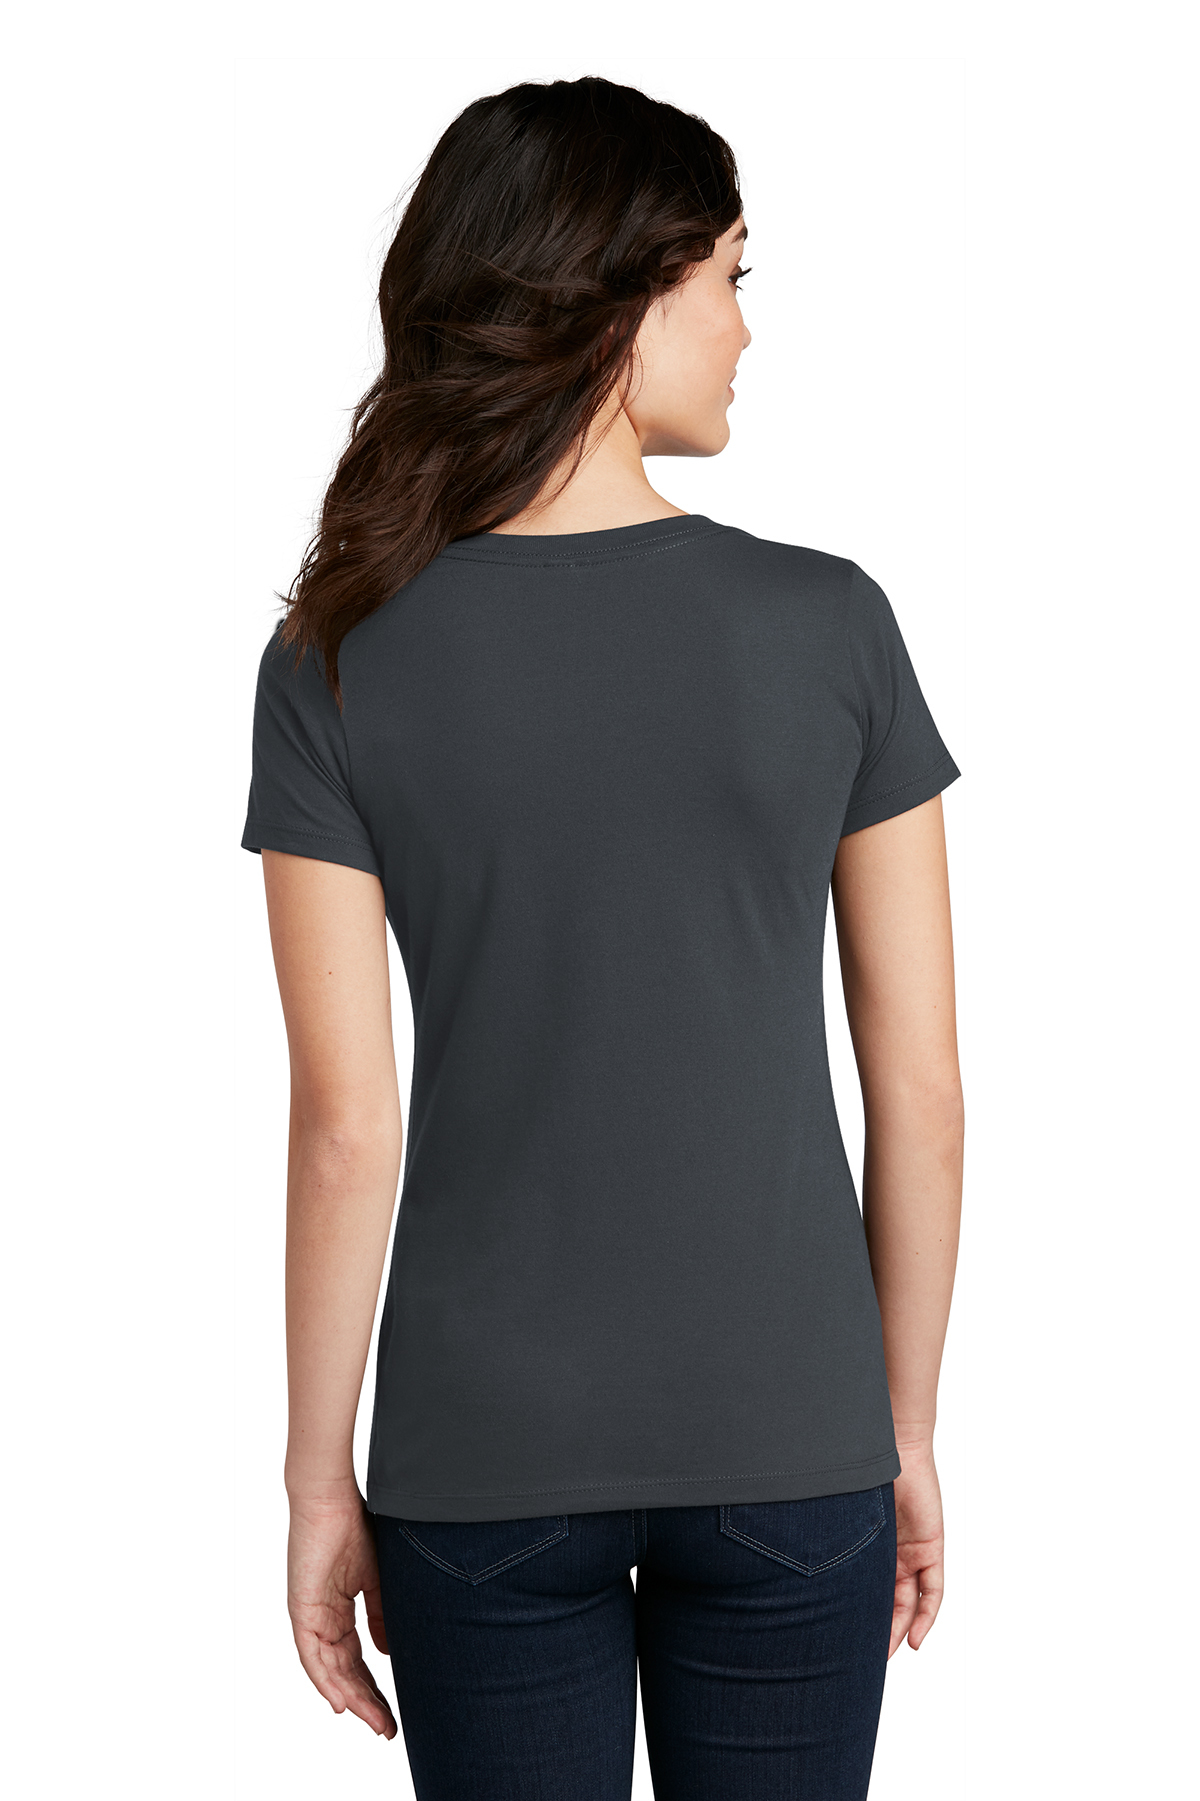 District Women's Perfect Blend V-Neck Tee | Product | District